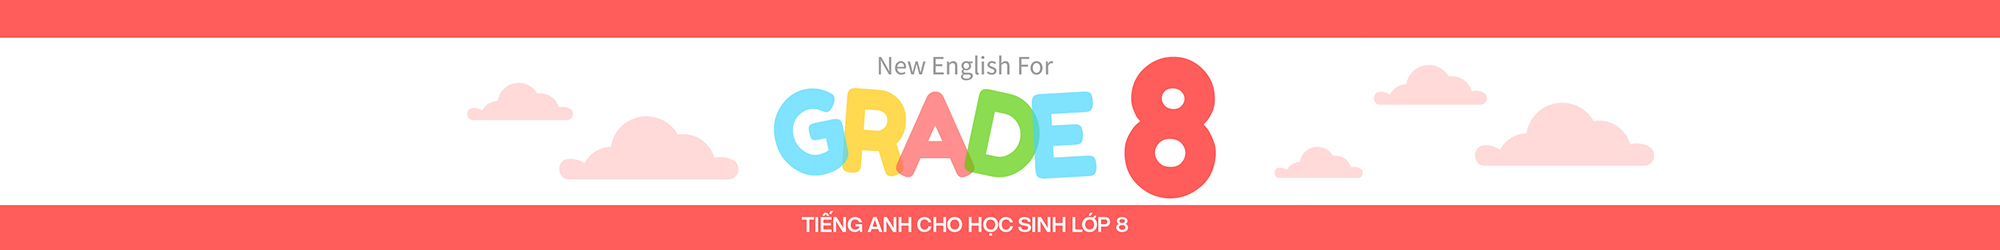 NEW ENGLISH FOR GRADE 8